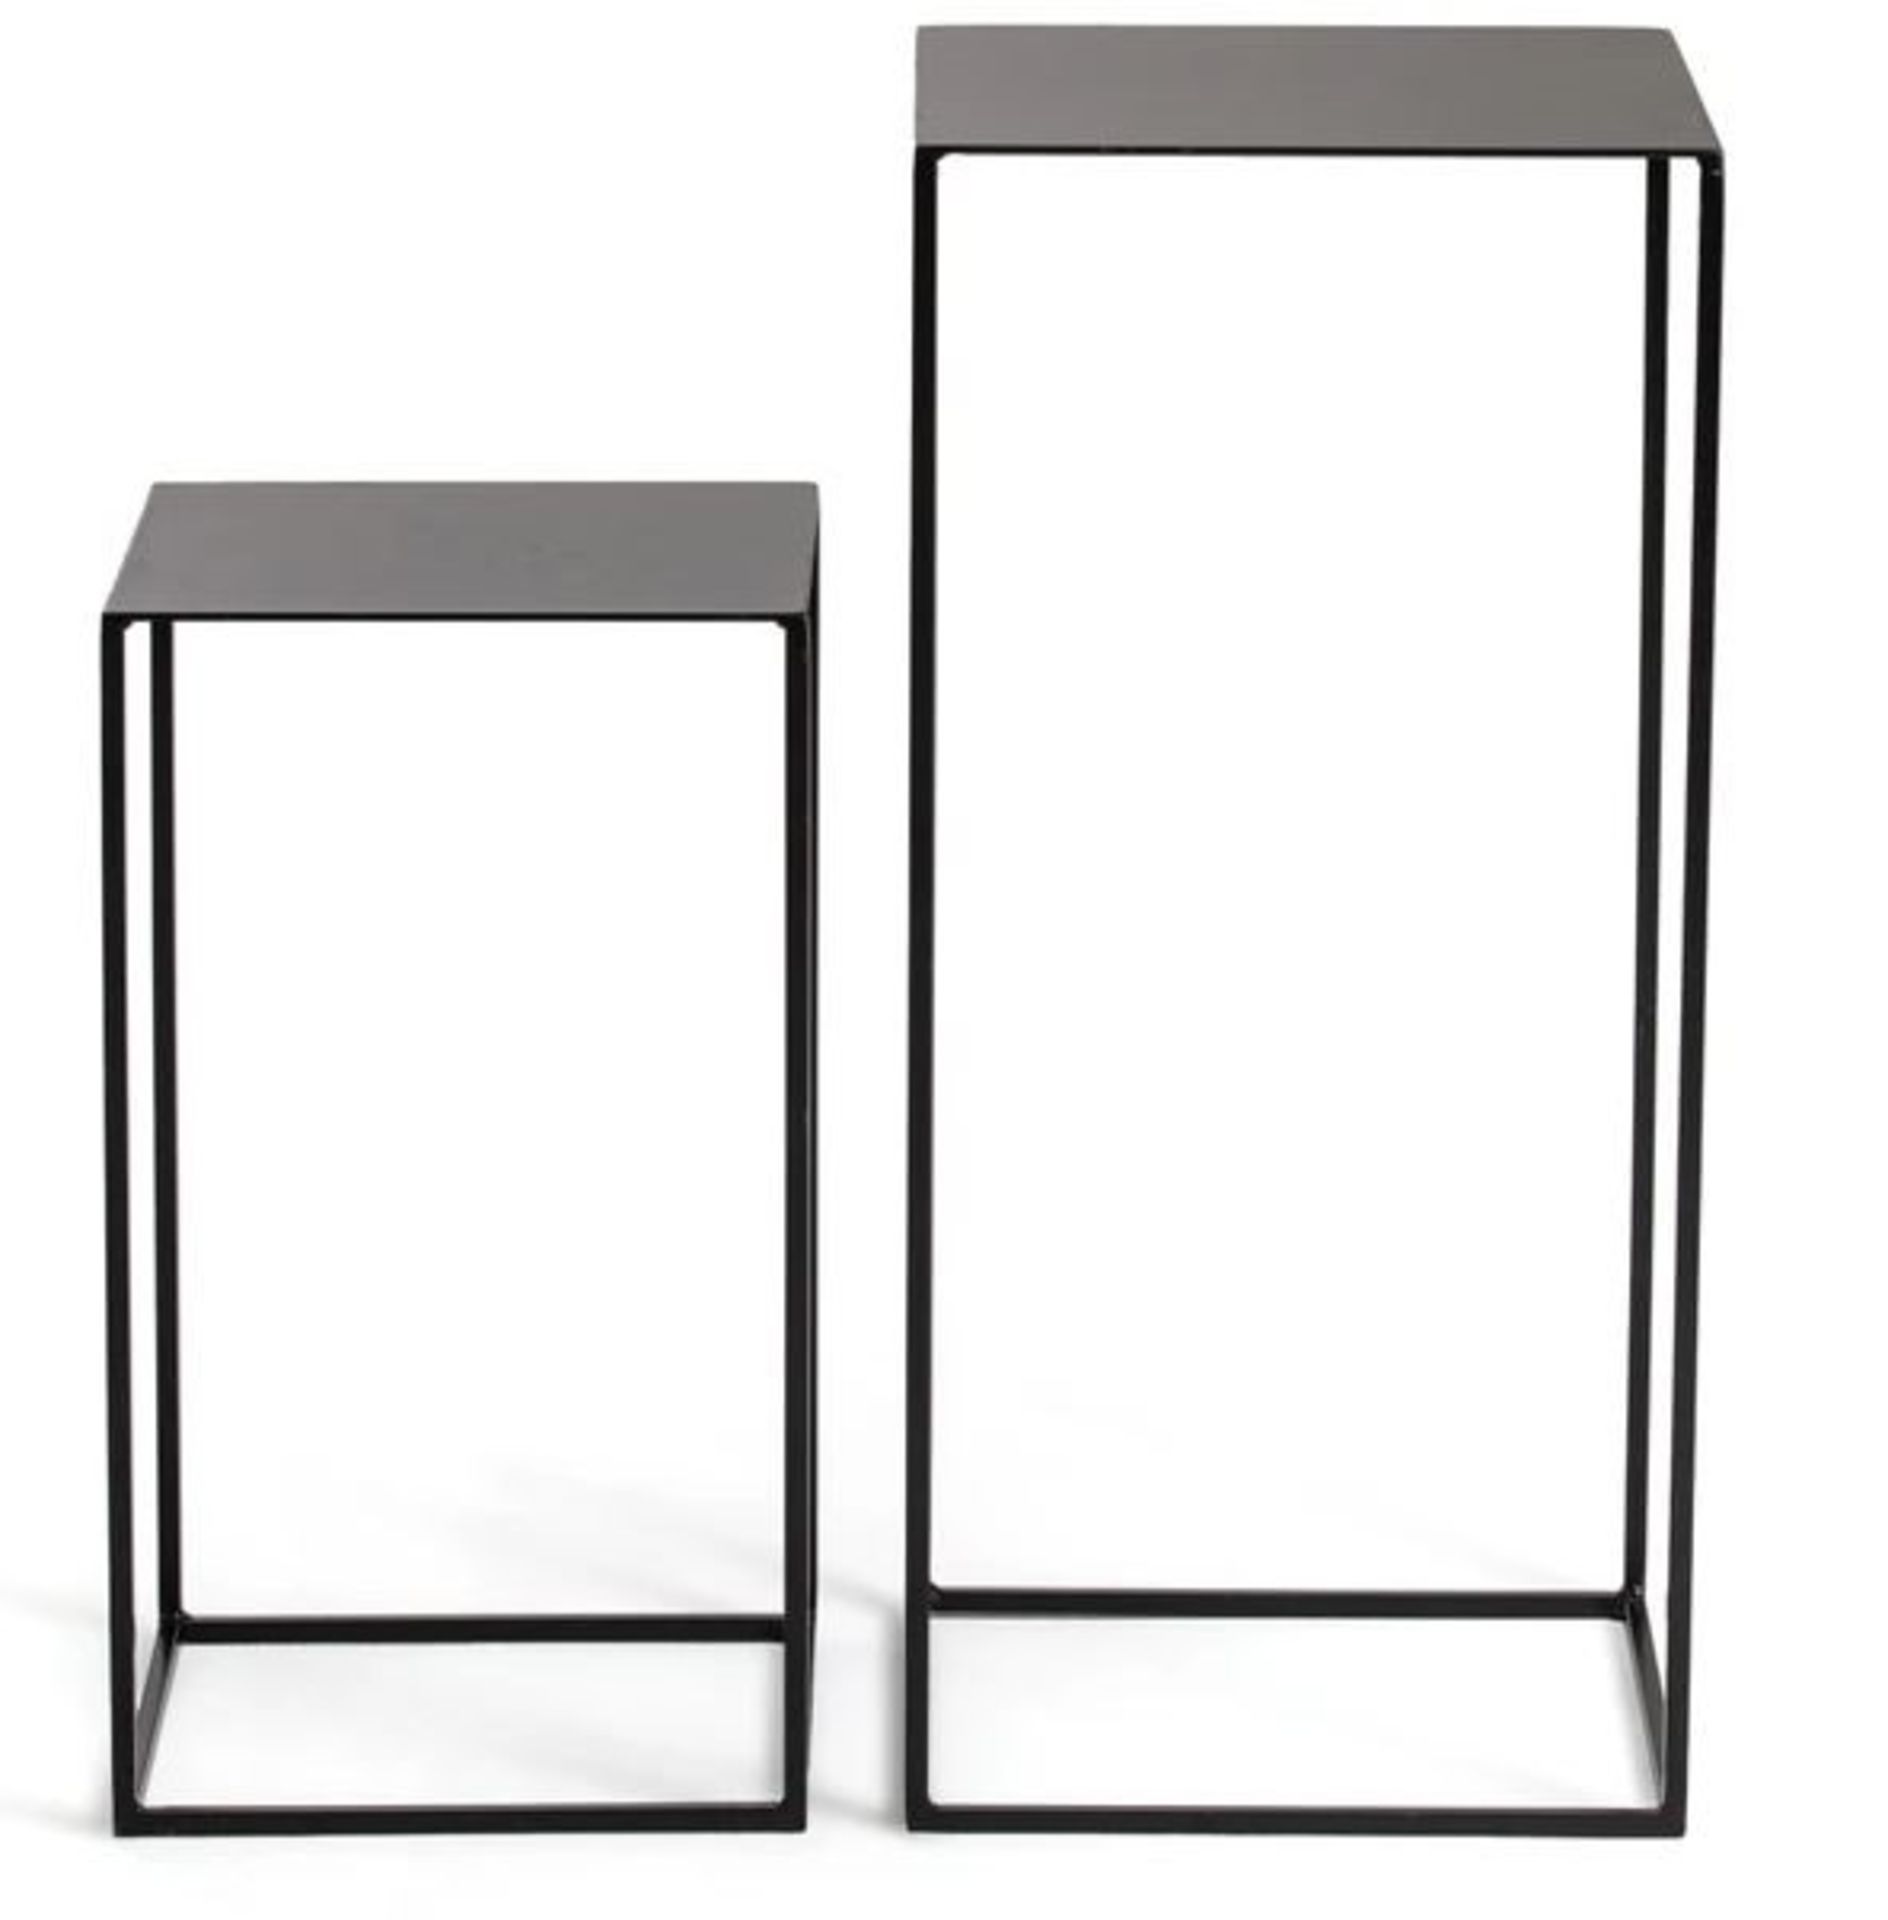 LA REDOUTE SET OF 2 ROMY NESTING SIDE TABLES IN LACQUERED METAL